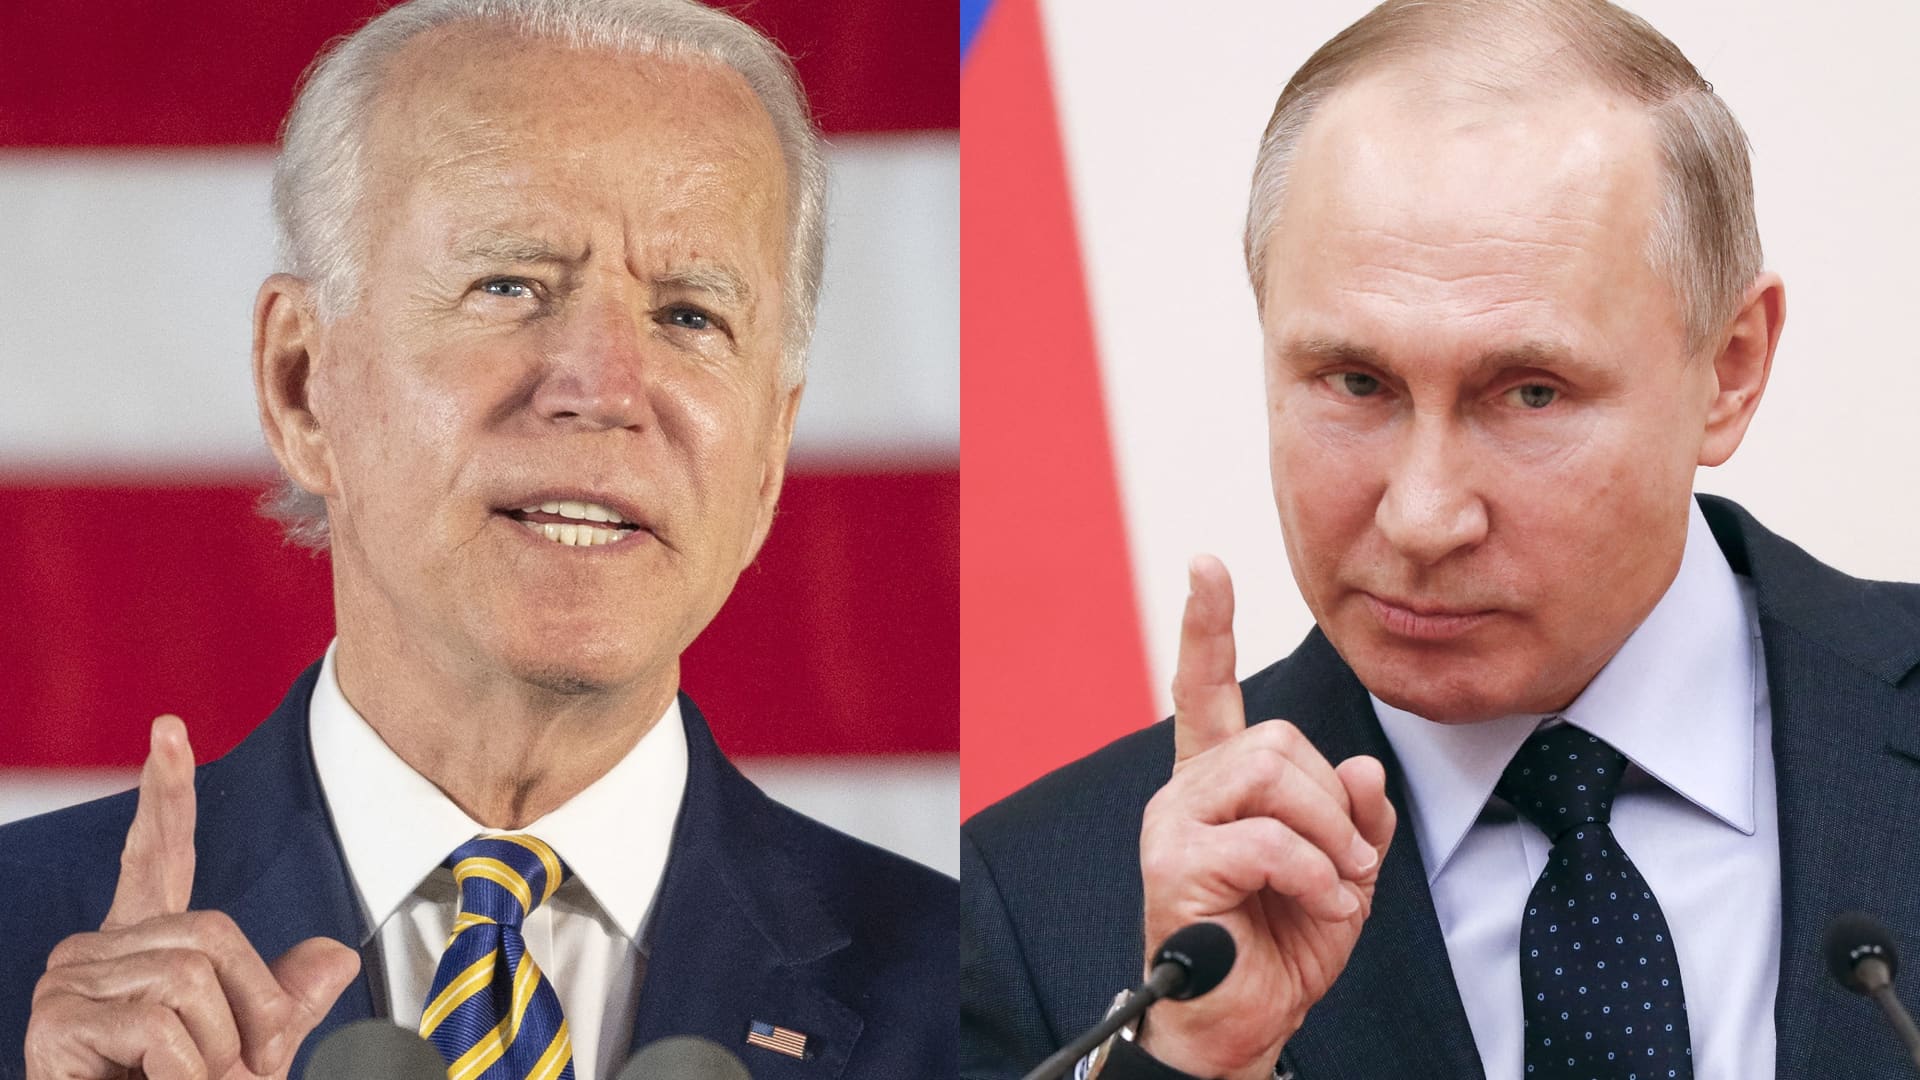 This combination of files pictures created on June 7, 2021 shows then Democratic presidential candidate Joe Biden speaking about reopening the country during a speech in Darby, Pennsylvania, on June 17, 2020 and Russian President Vladimir Putin delivering a speech during a meeting with Russian athletes and team members, who will take part in the upcoming 2018 Pyeongchang Winter Olympic Games, at the Novo-Ogaryovo state residence outside Moscow on January 31, 2018.